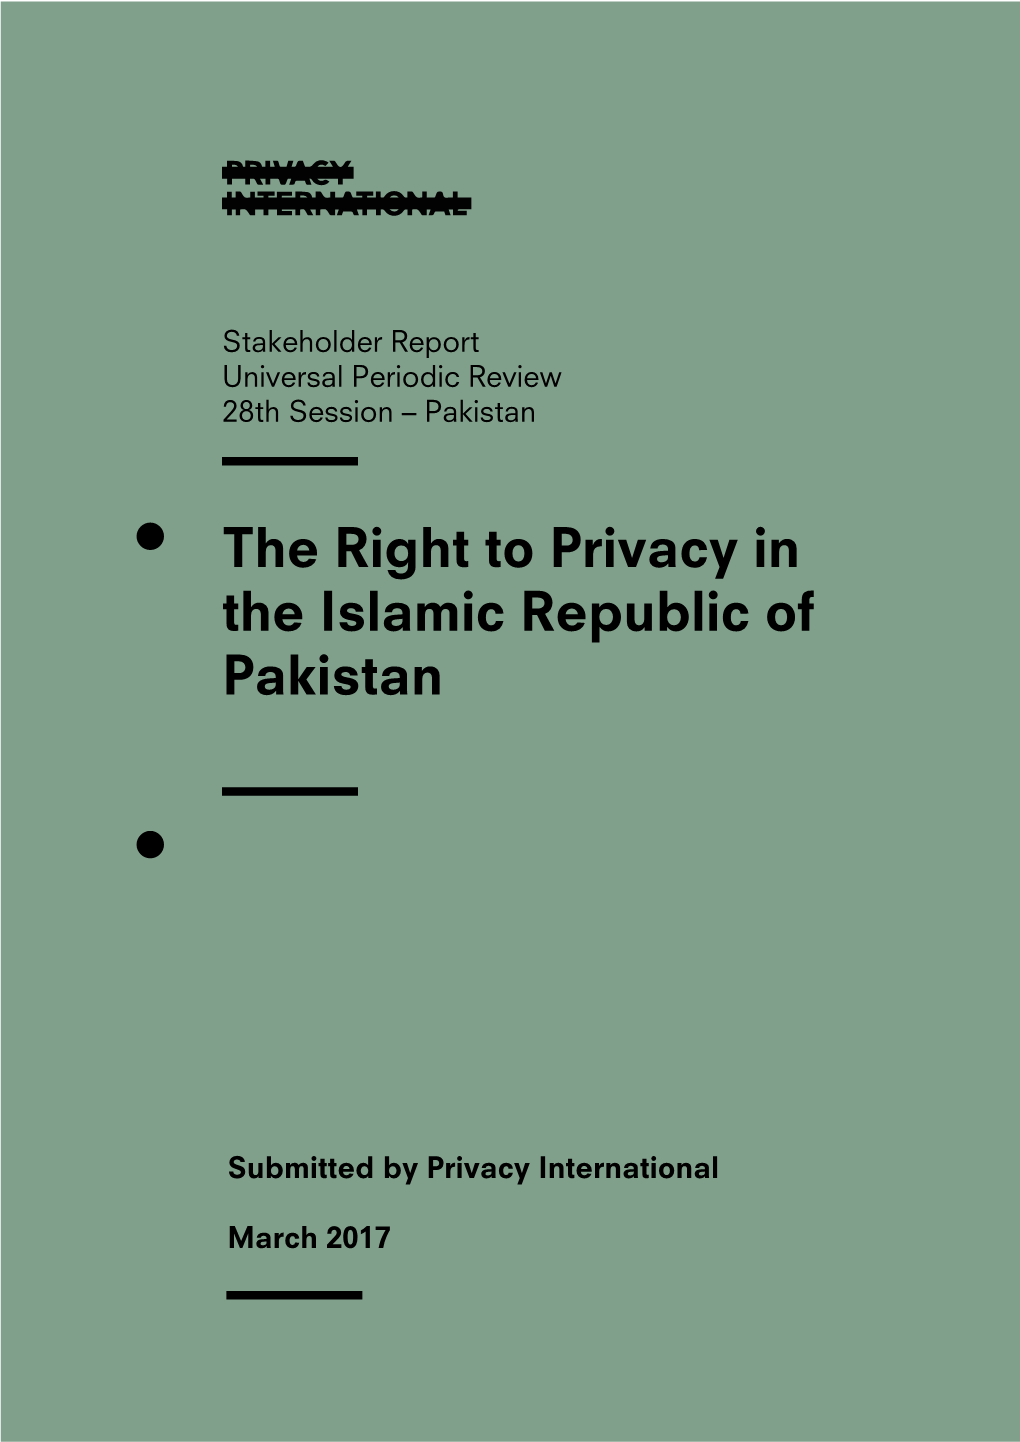 The Right to Privacy in the Islamic Republic of Pakistan